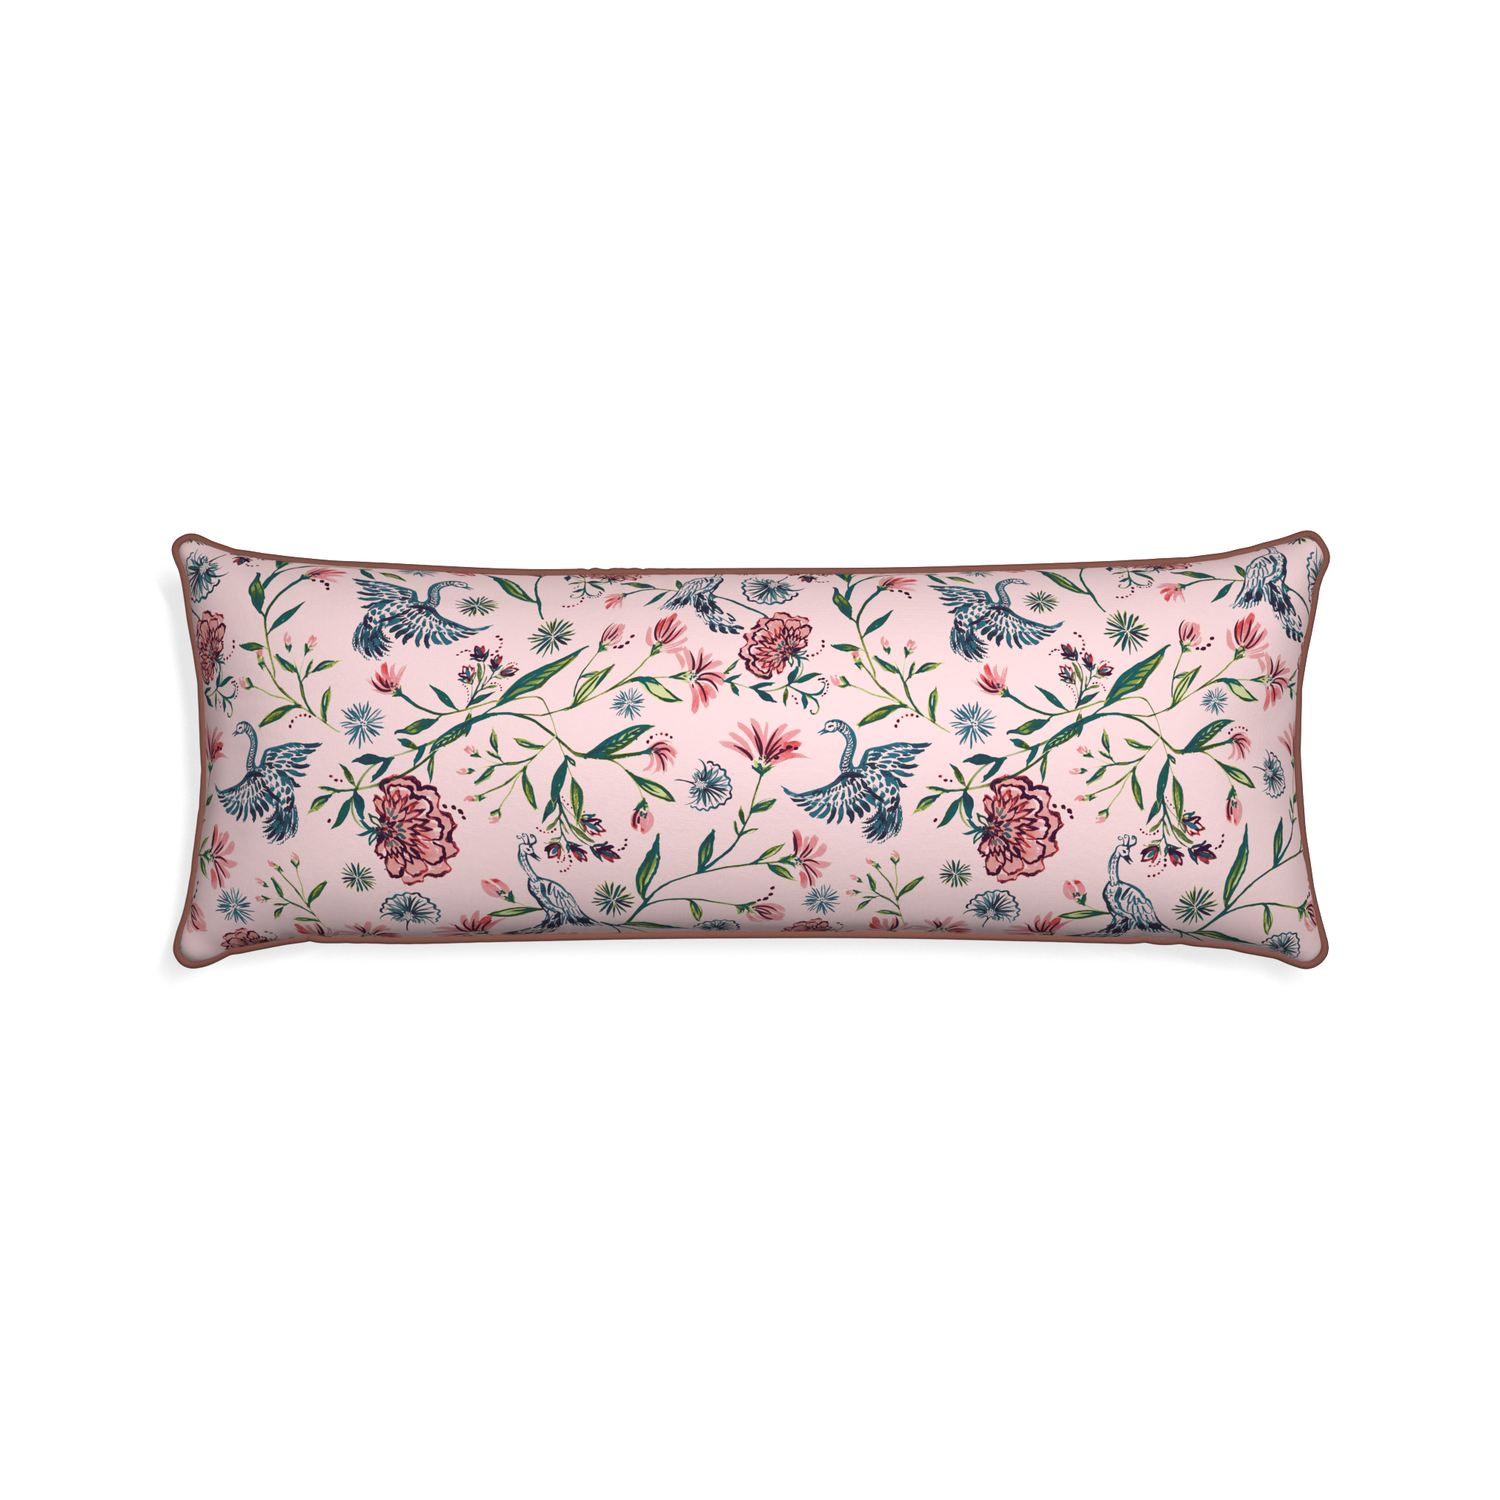 Xl-lumbar daphne rose custom pillow with w piping on white background